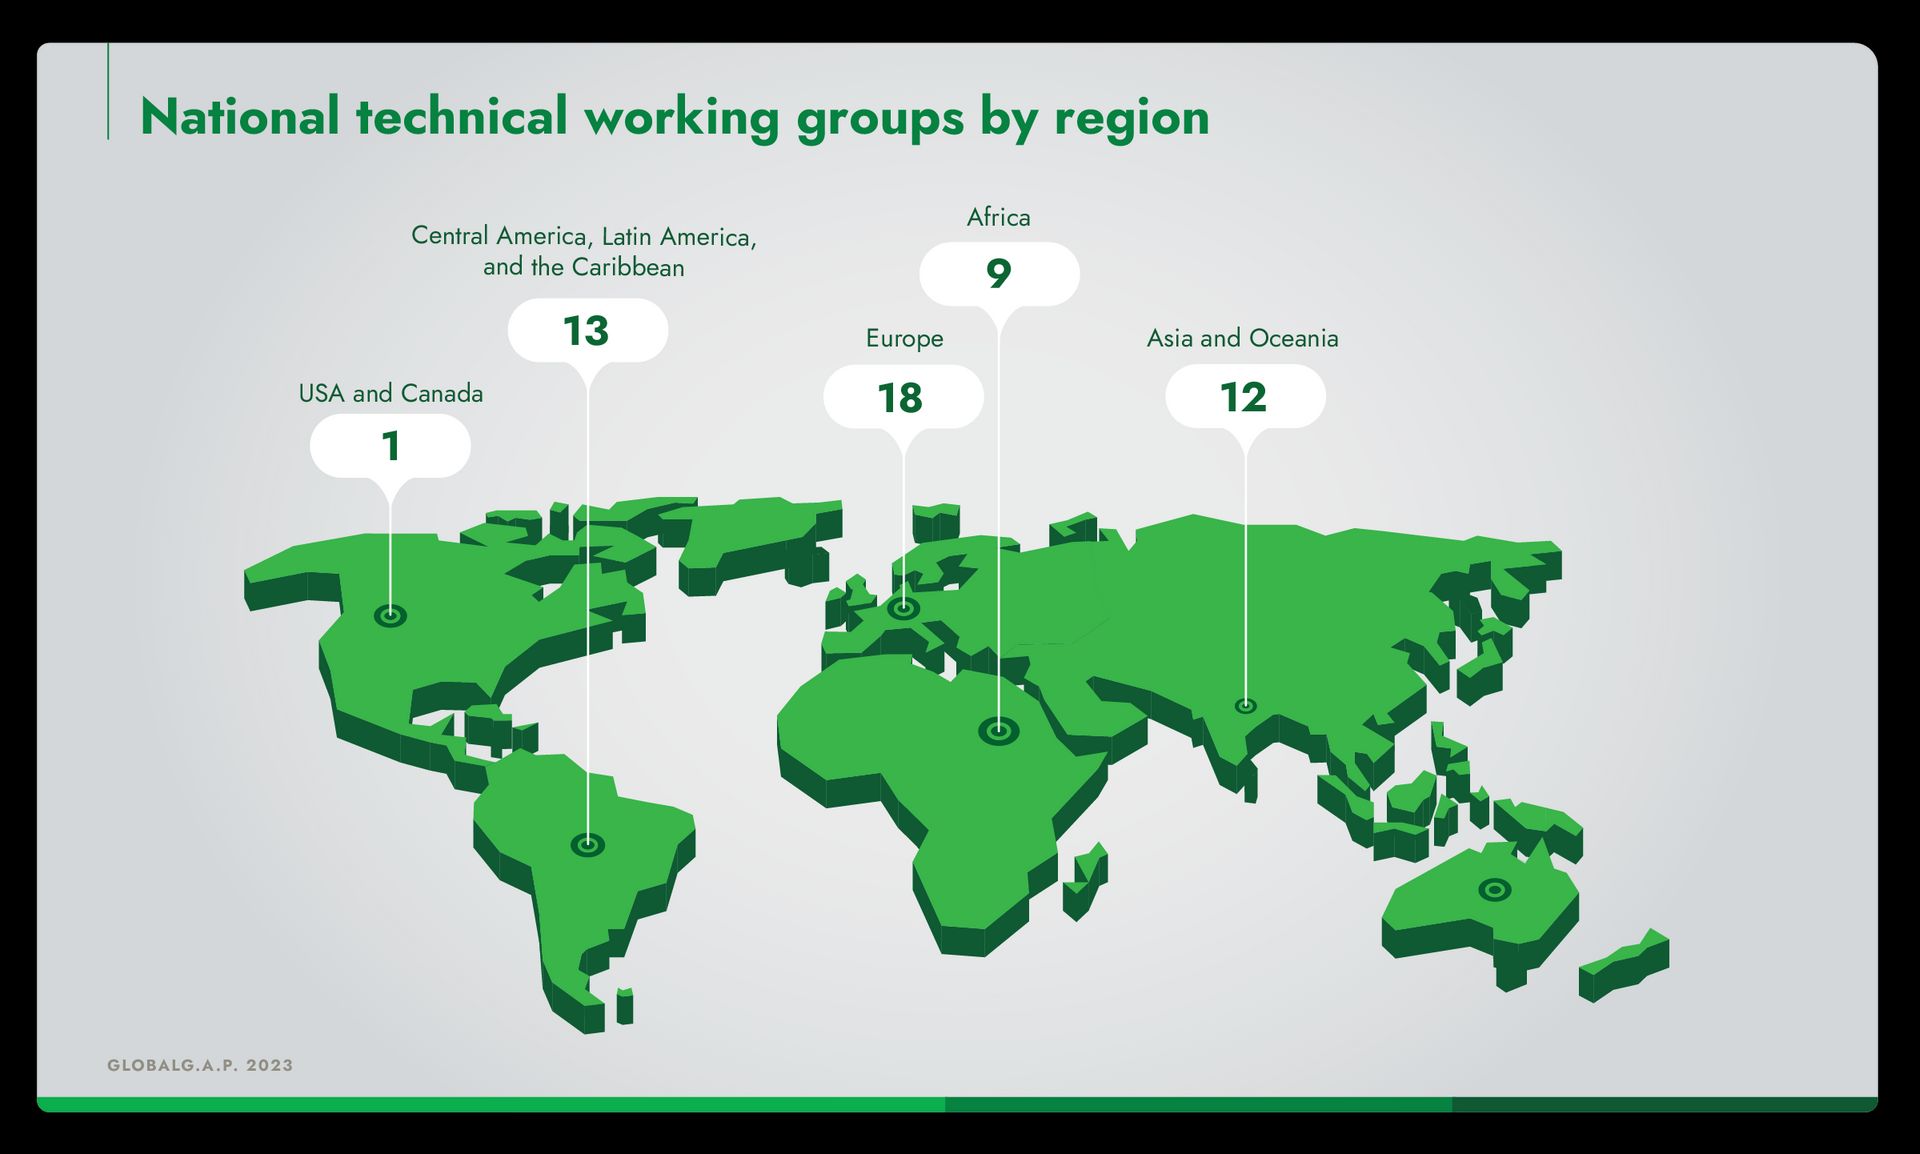 Infographic with a world map identifying the number GLOBALG.A.P. national technical working groups per region